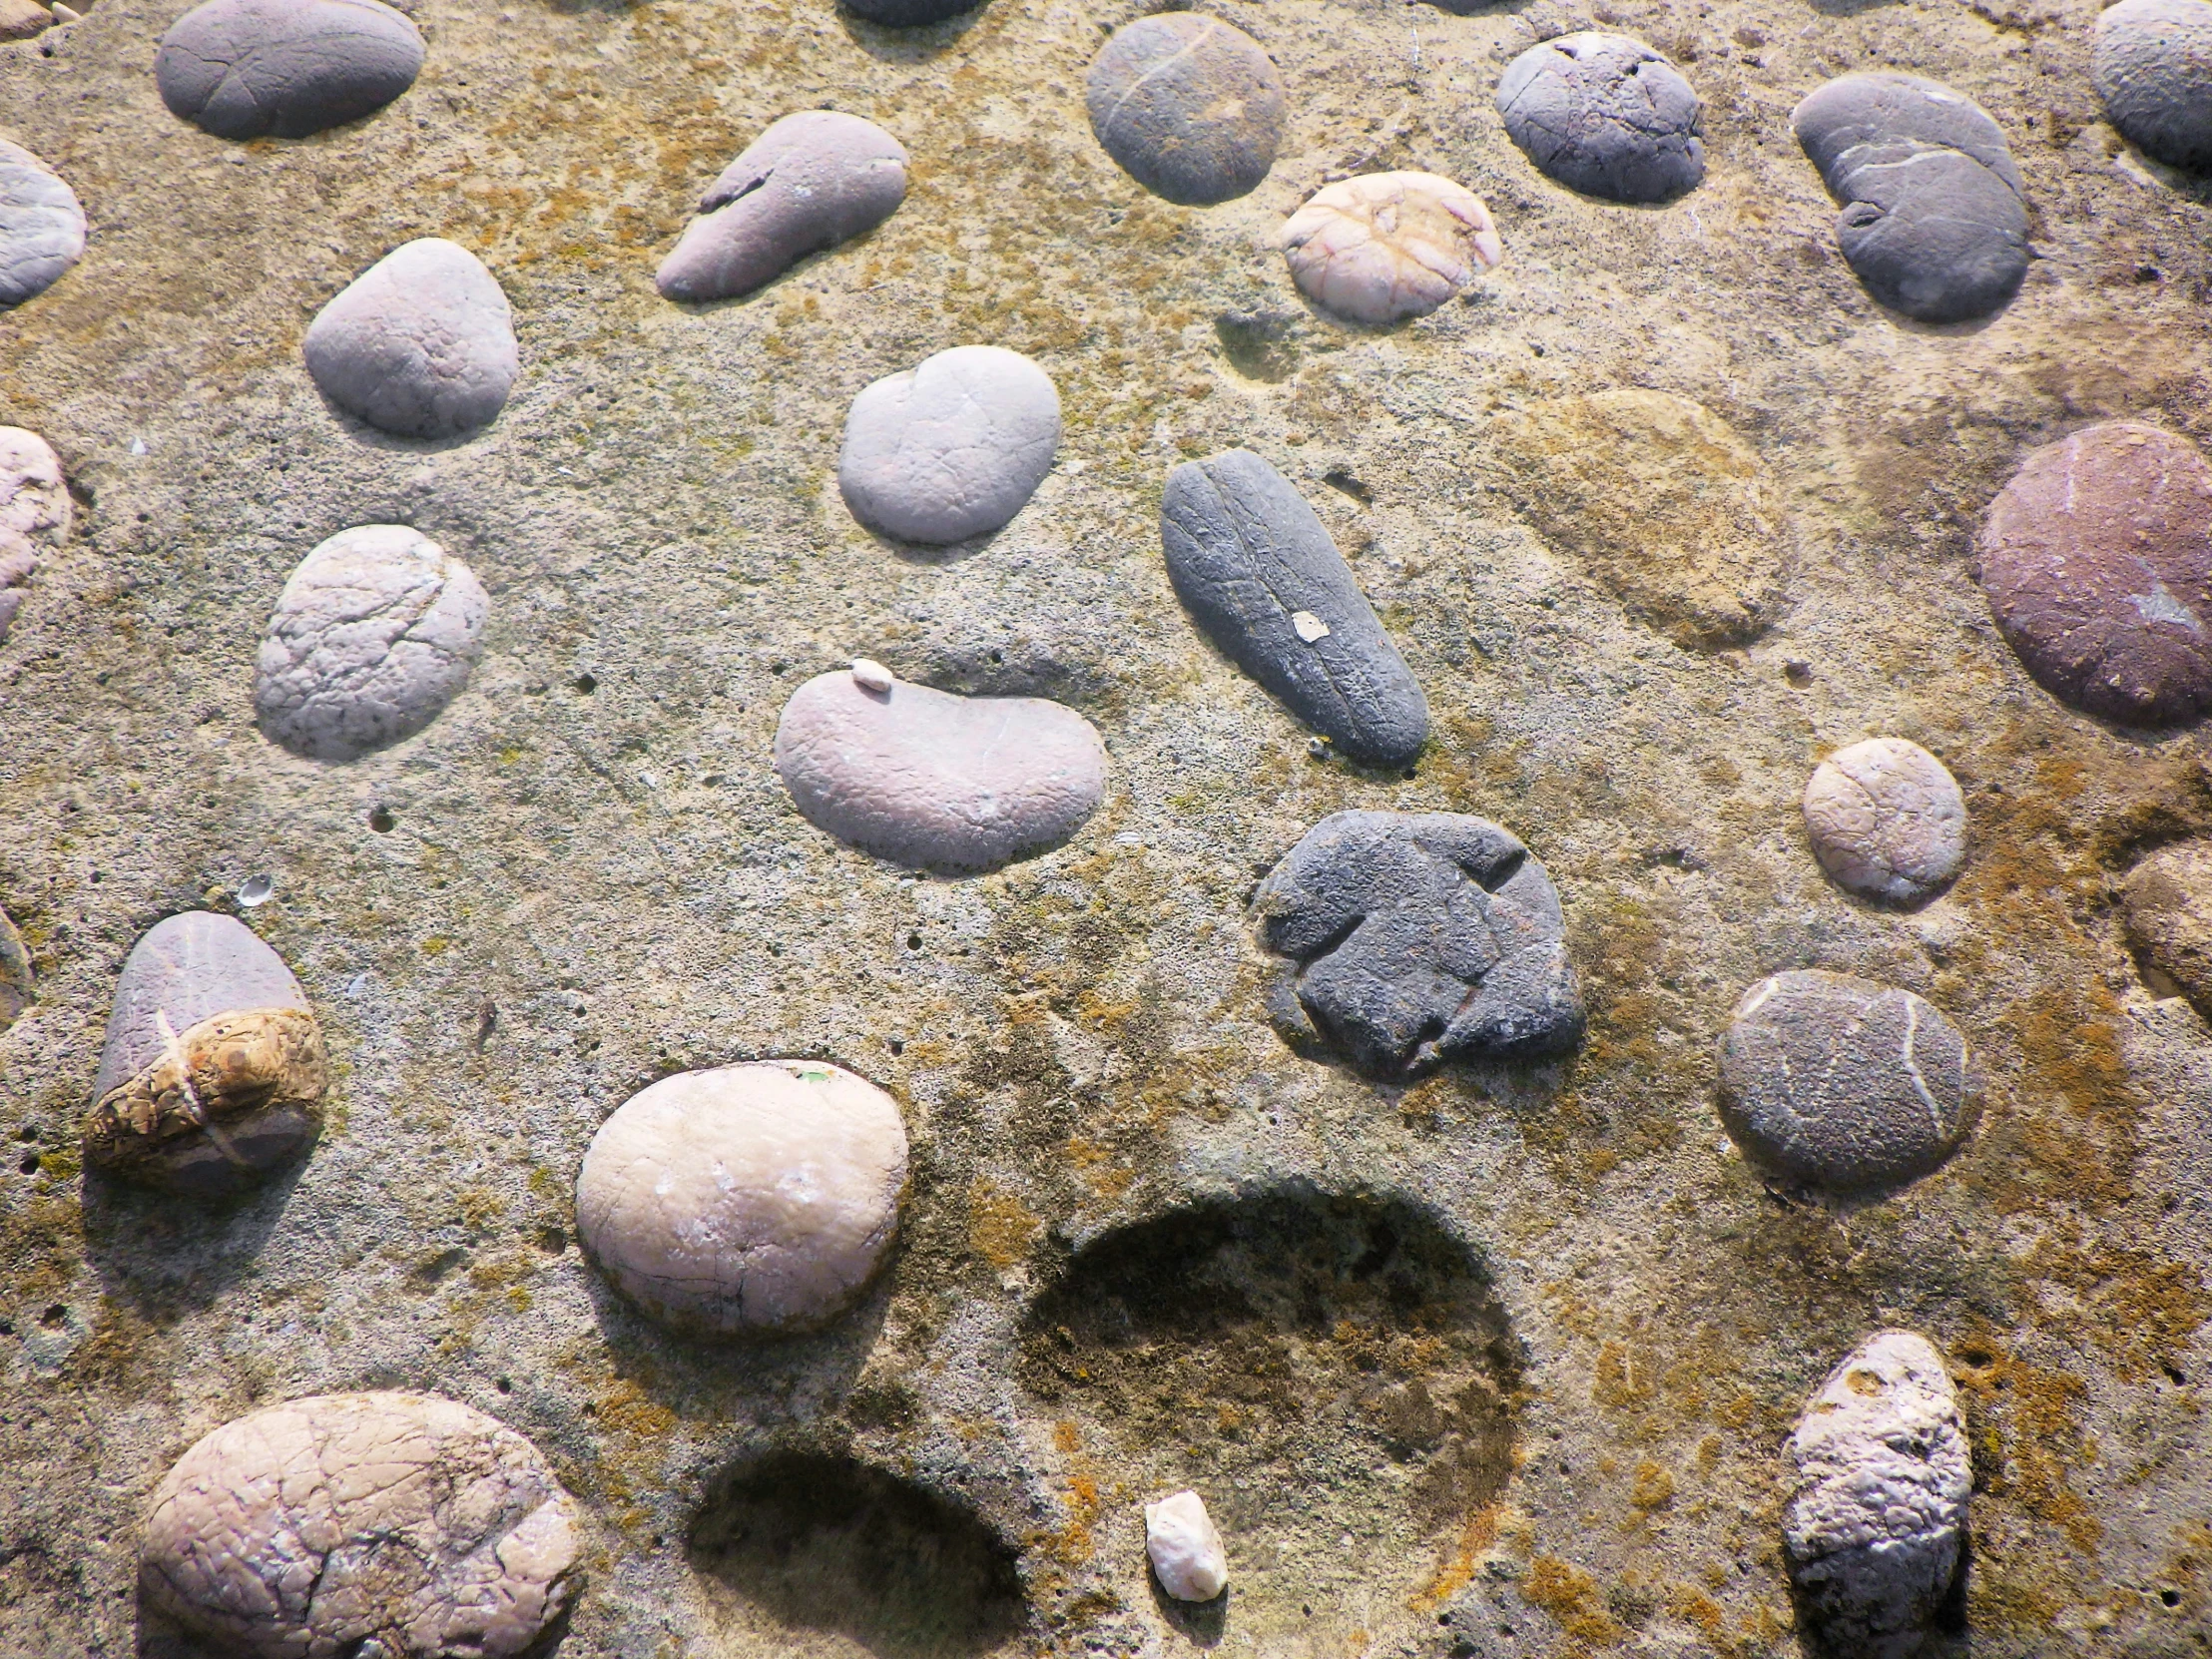 many rocks and sand with footprints on the ground